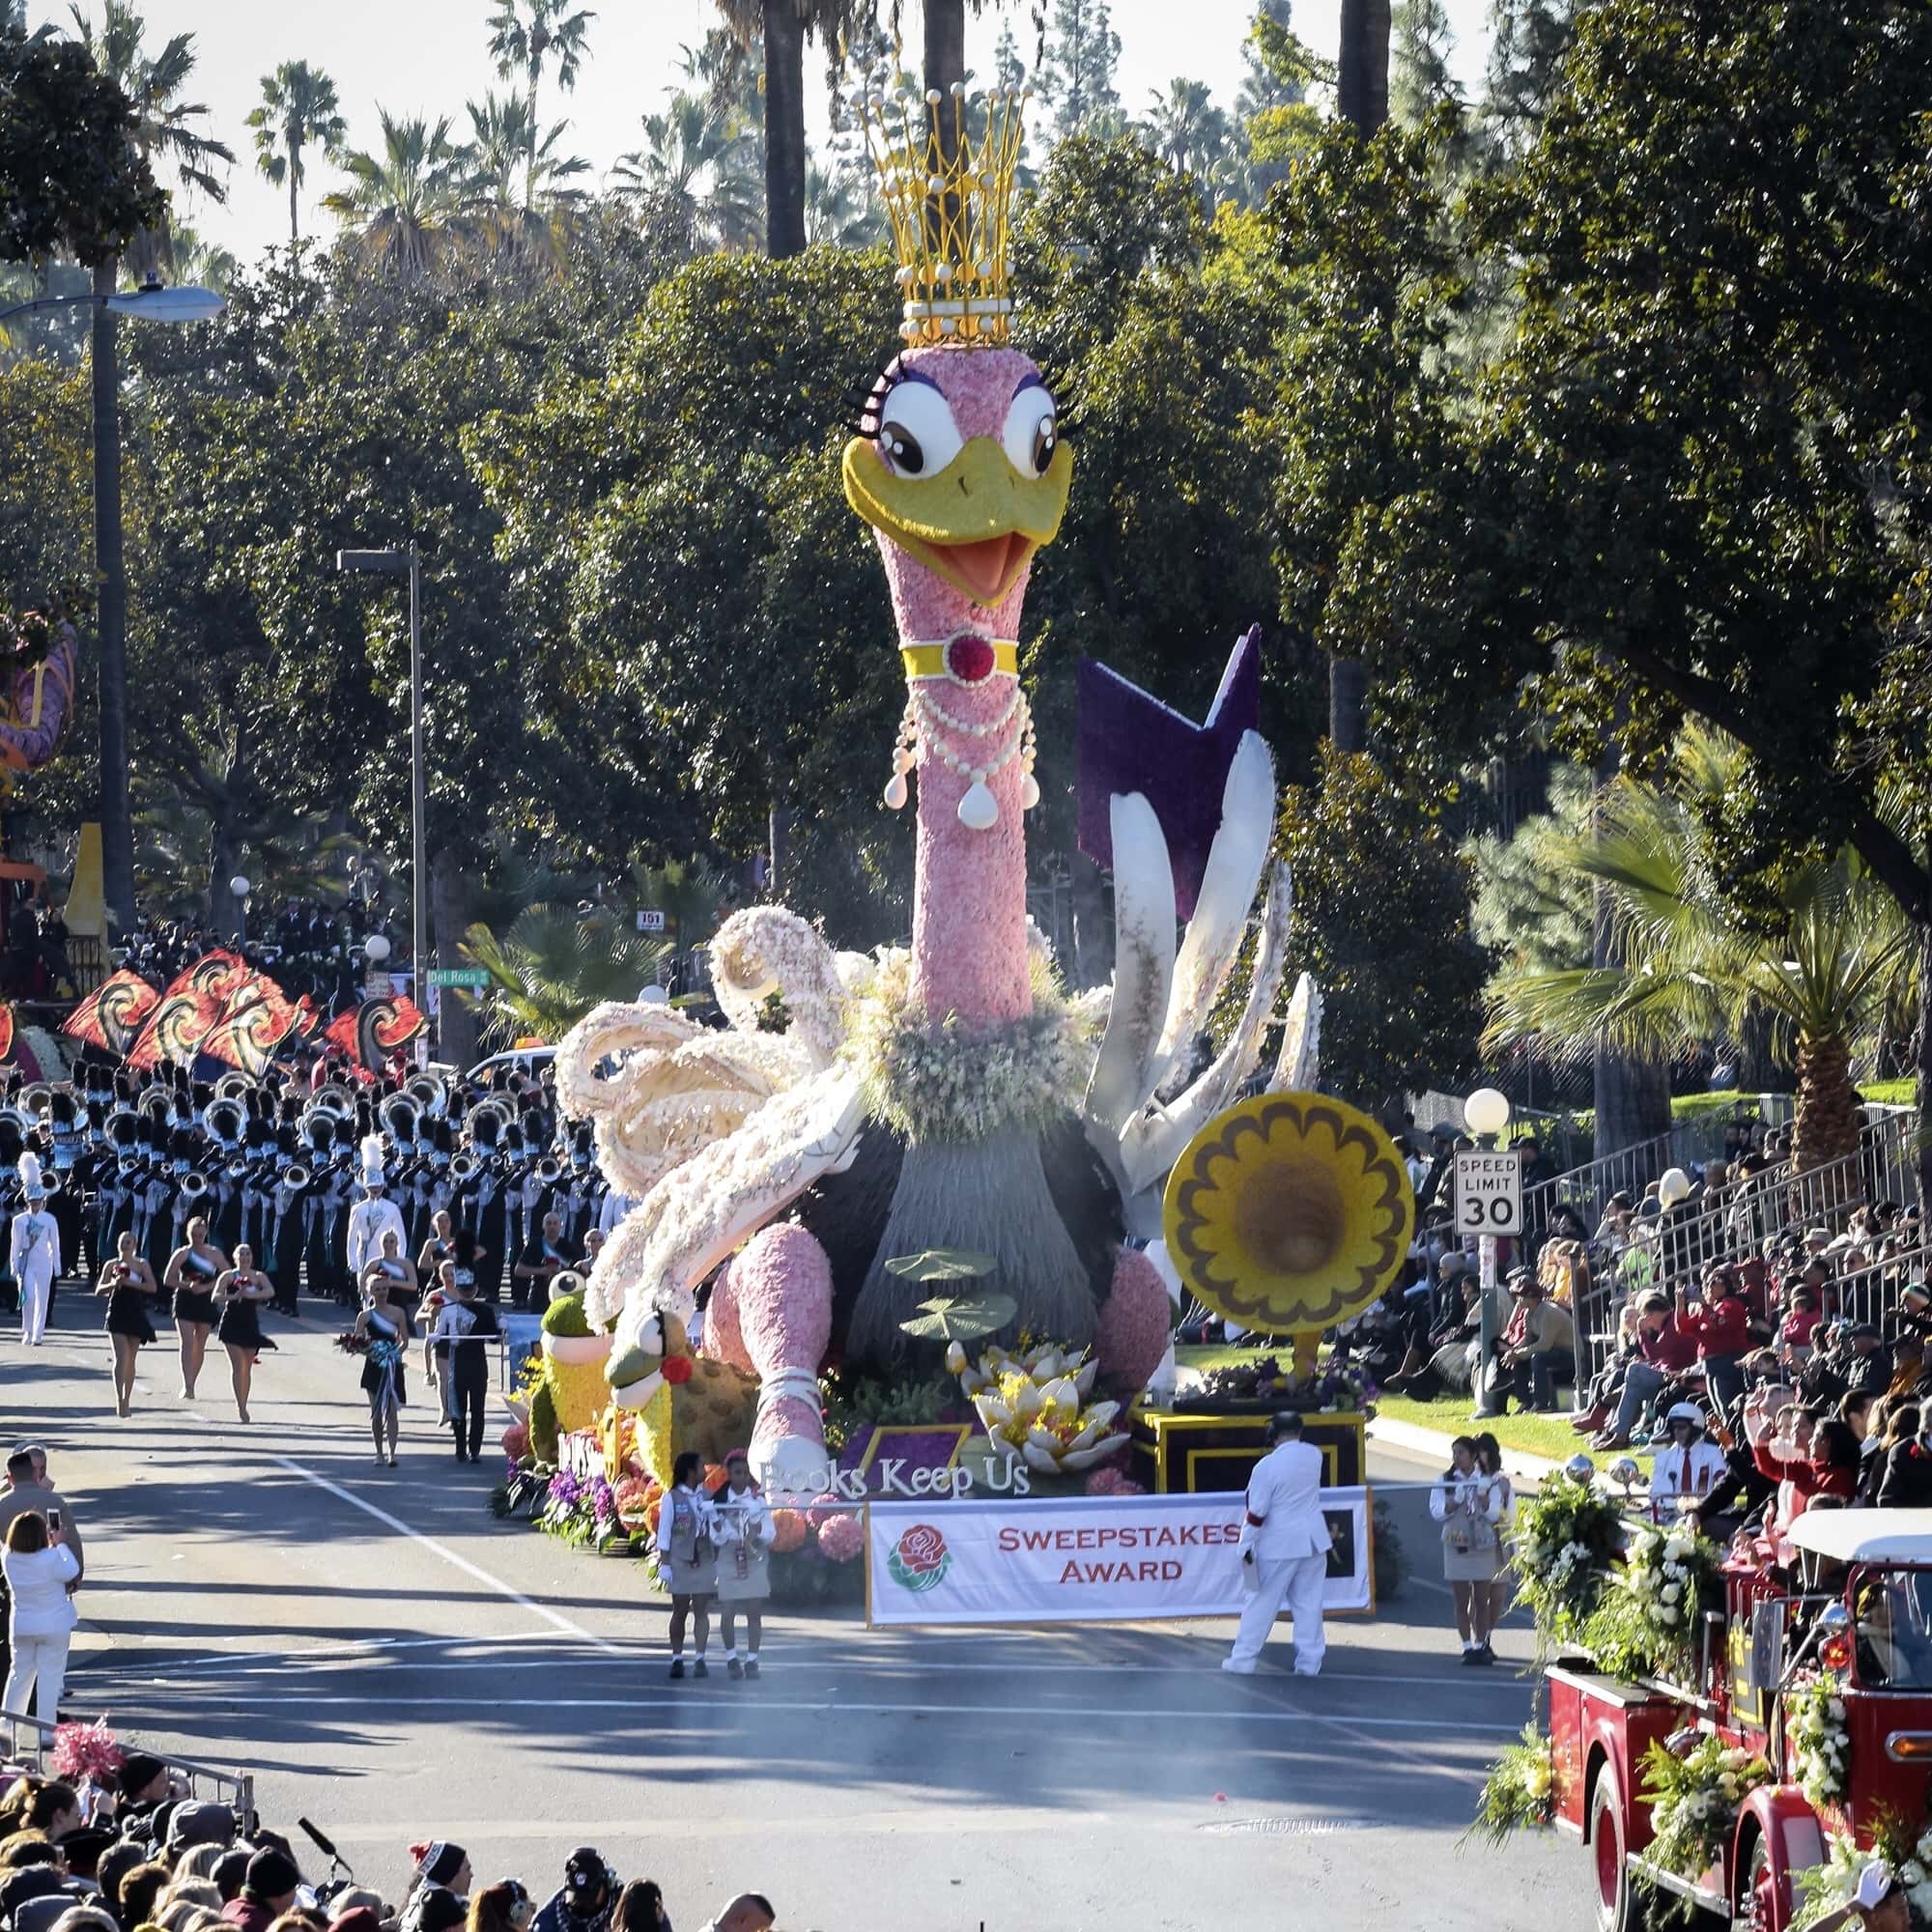 Sakchd - Fiesta Parade Floats Takes 9 Rose Parade Trophies for Its Clients,  Including Sweepstakes for The UPS Store - Fiesta Parade Floats